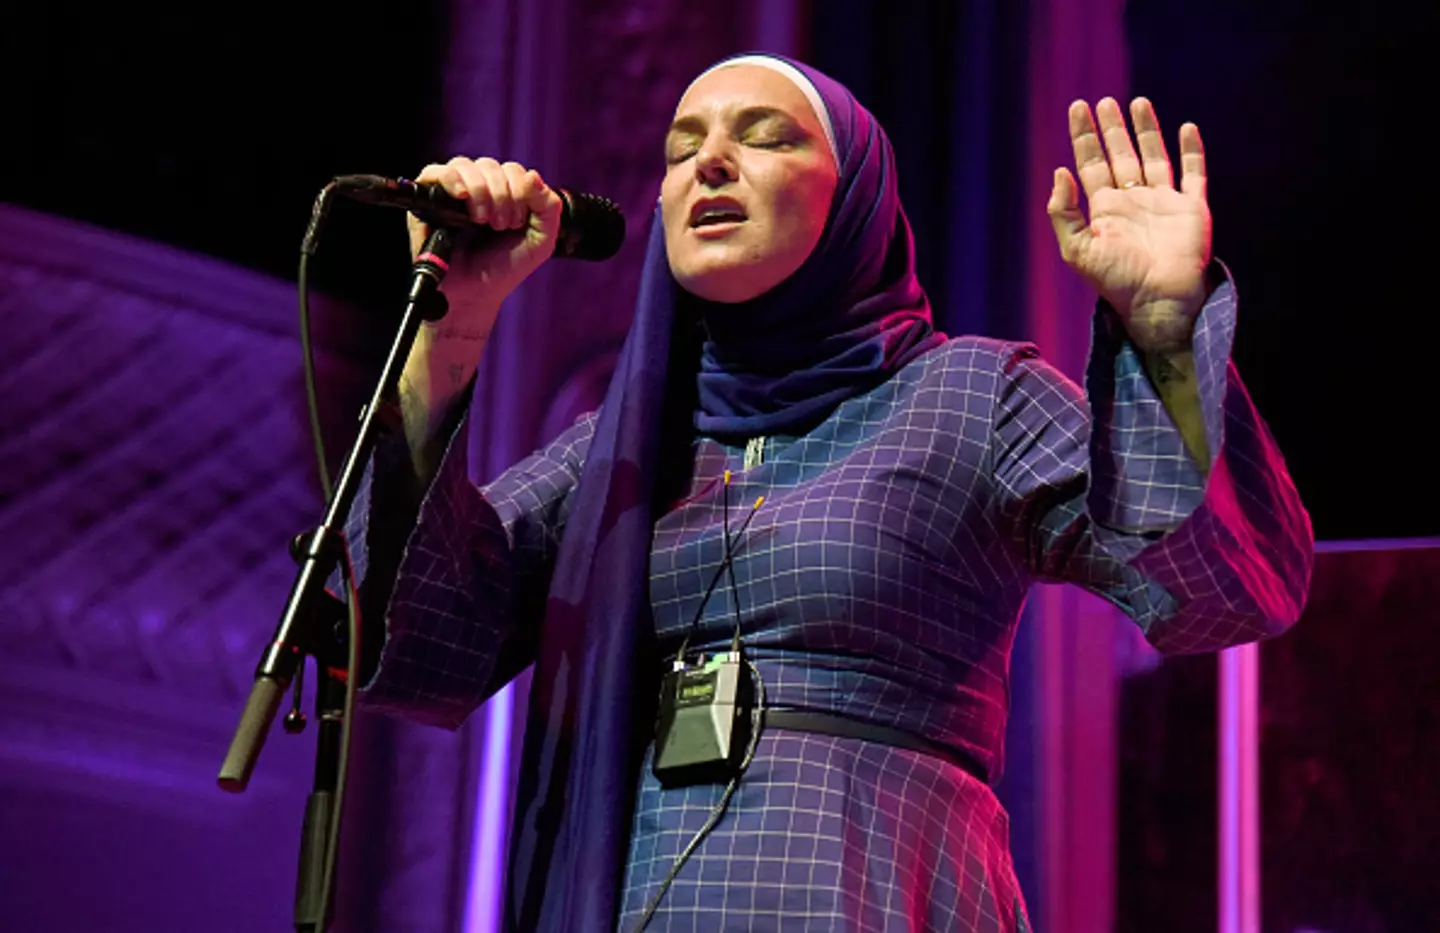 Sinead O'Connor passed away at the age of 56.